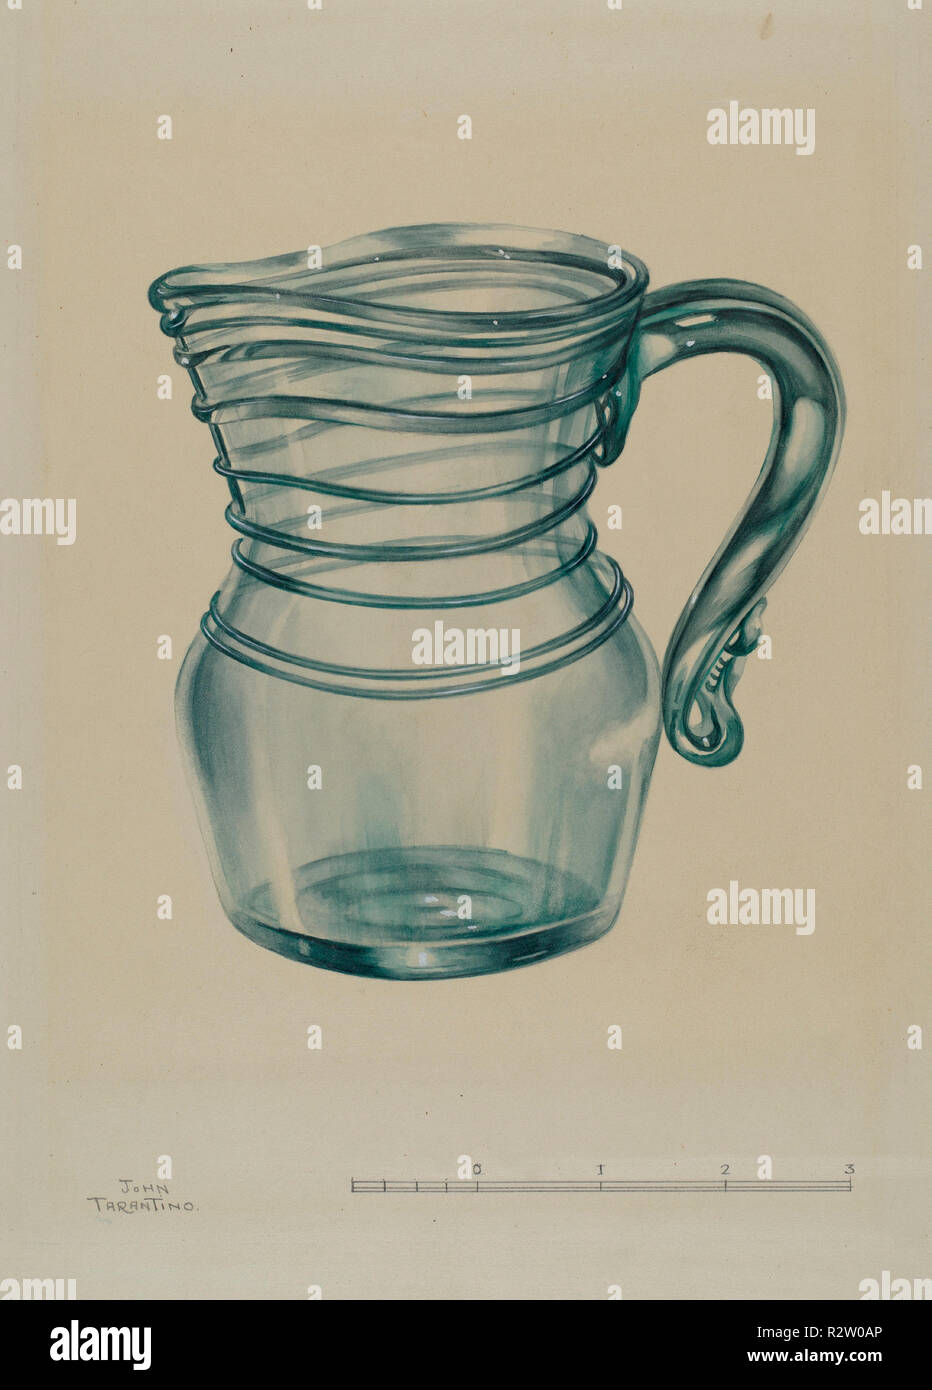 Pitcher. Dated: 1937. Dimensions: overall: 31 x 23.2 cm (12 3/16 x 9 1/8 in.). Medium: watercolor and graphite on paperboard. Museum: National Gallery of Art, Washington DC. Author: John Tarantino. Stock Photo